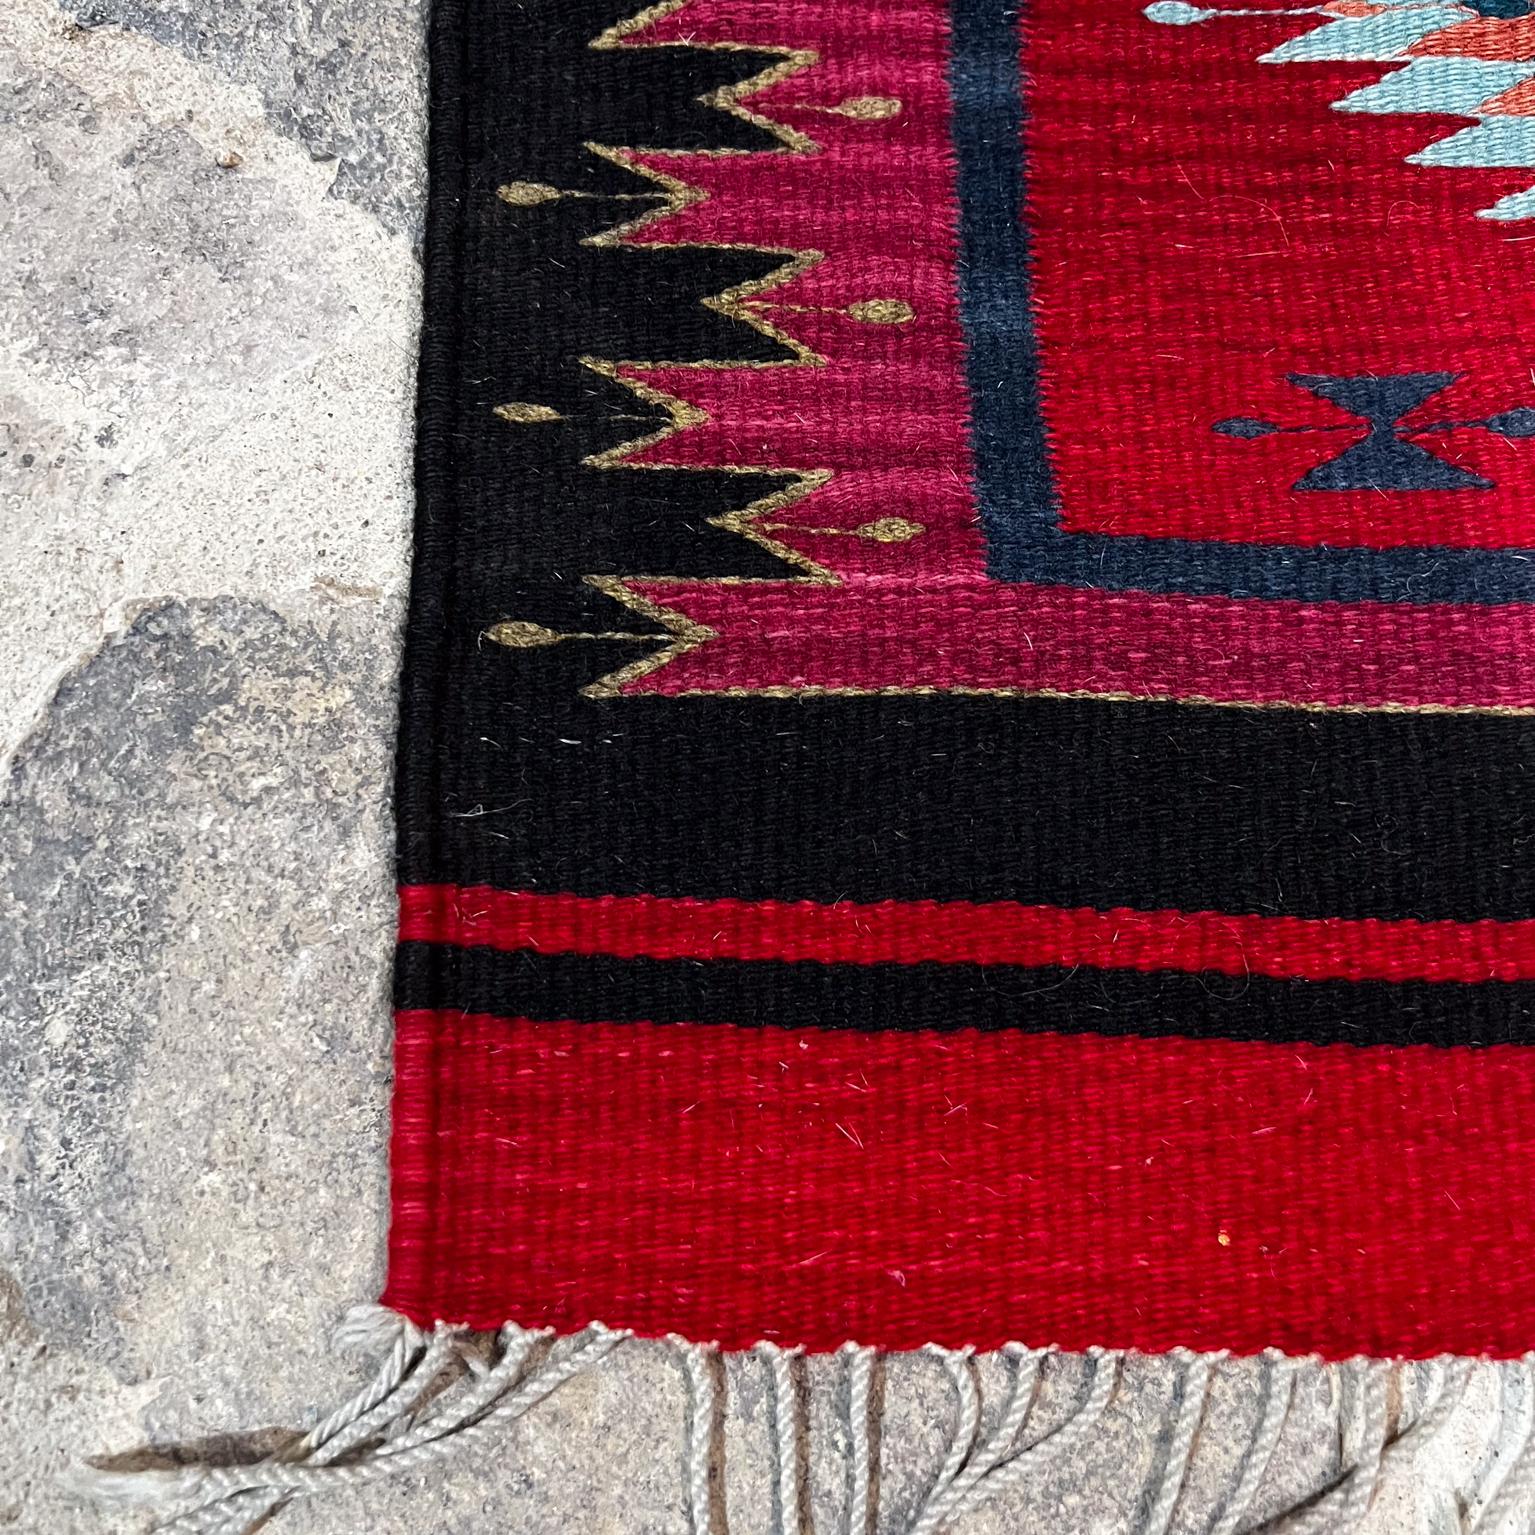 Native Navajo Style Wall Art Tapestry Colorful Black Pink Red In Good Condition For Sale In Chula Vista, CA